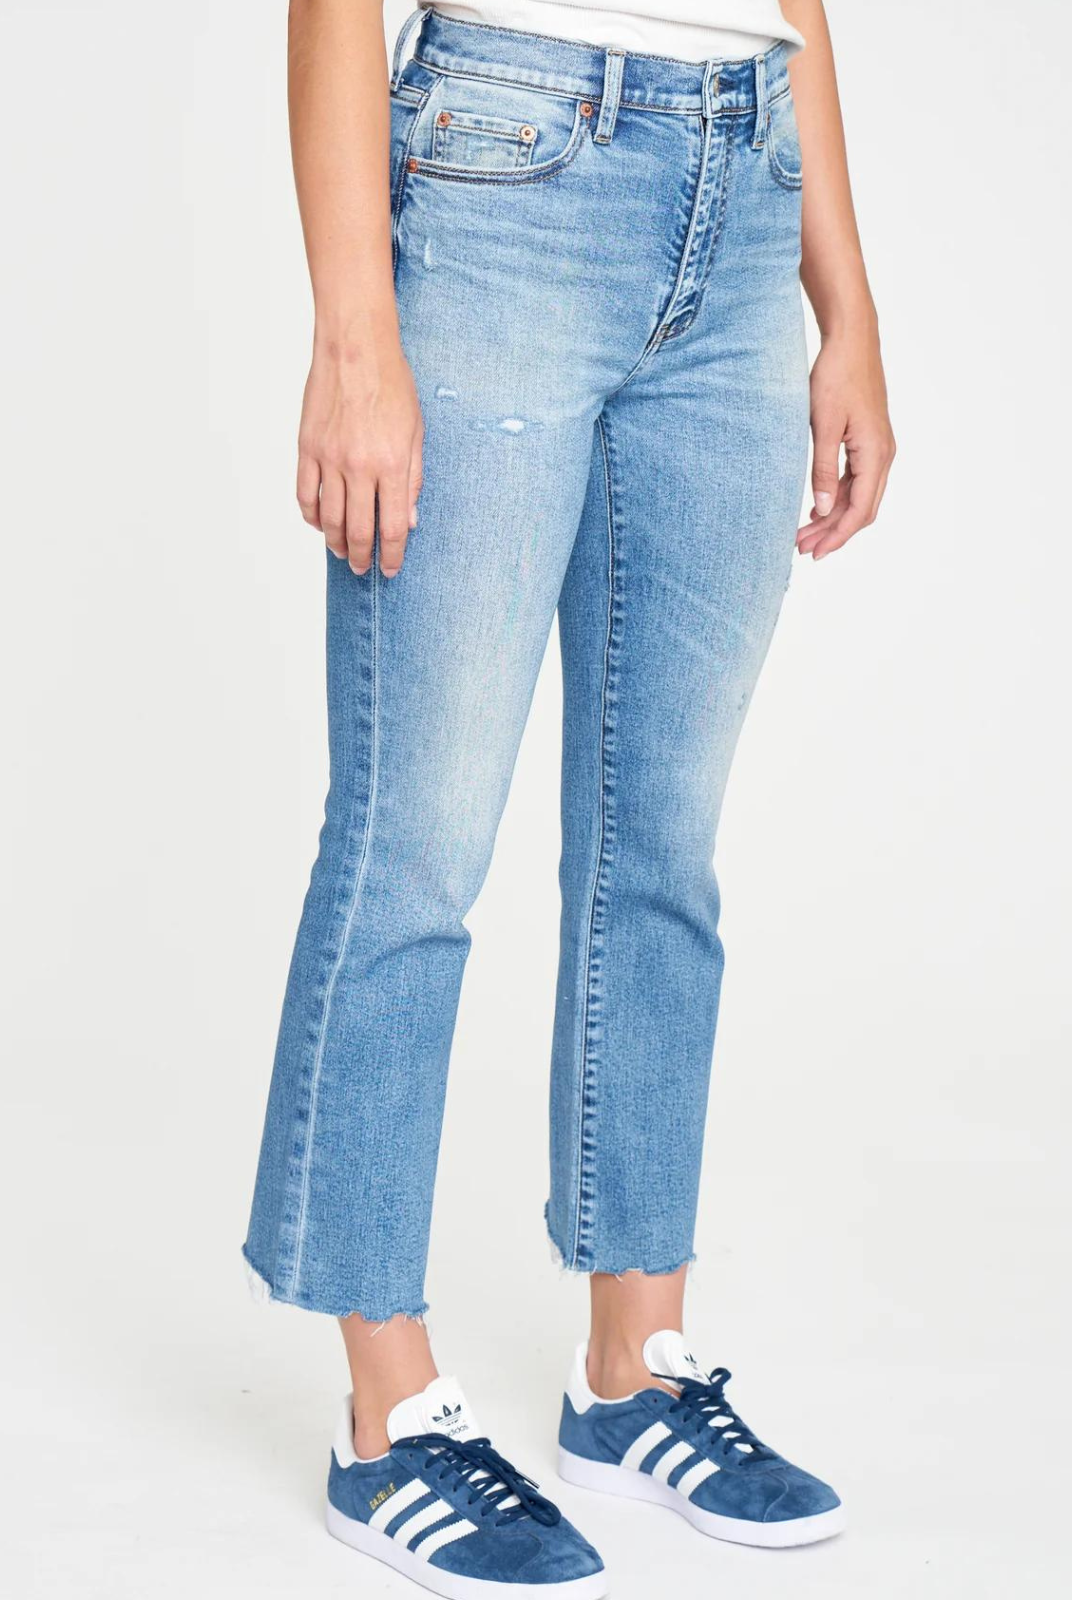 Daze- Shy Girl Crop Flare-PDA Need a Hug? This cropped flare is made using our "Hug" denim. It is a slightly heavier fabric with a stretch that hugs your body, while smoothly cinching you in. In a medium wash with vintage fading, this is a core jean for your closet.